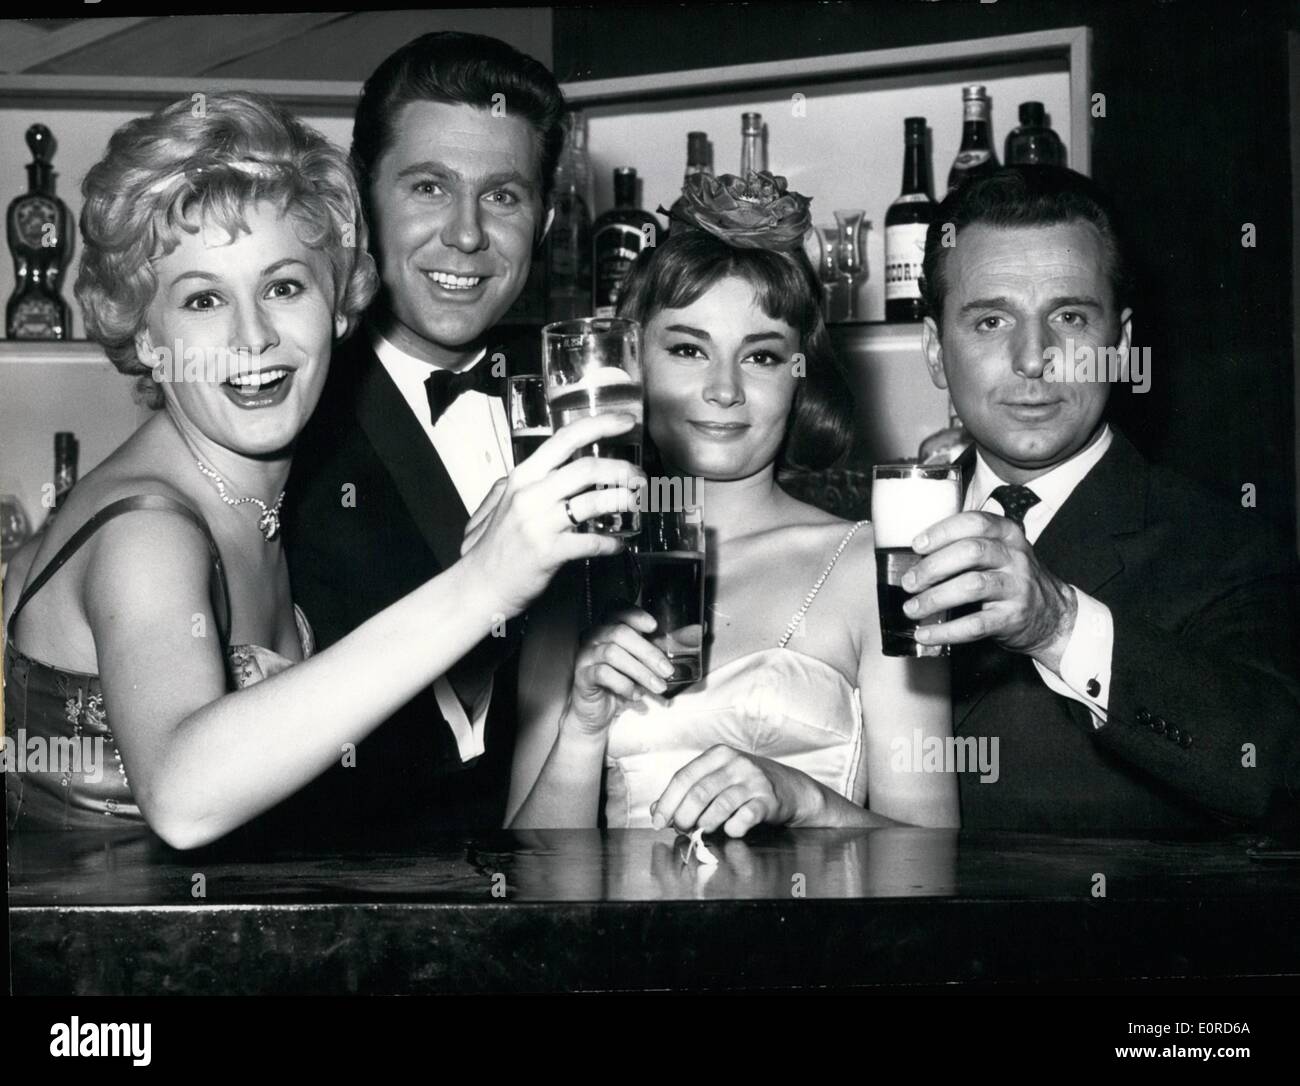 Mar. 03, 1959 - Cheers and happy Easter! ... said Waltraut Haas, Willy Hagara, Violette Ferrari and Georg Thomalla (from left: Waltraut Haas, Willy Hagara, Violette Ferrari, Georg Thomalla) who hope for a good start of their new film ''Red Pepper''. The film was made from the play by Max Reimann and Otto Schwartz ''The Jump into Marriage''. In the comedy, Ilona (Violetta Ferrari) shows that, in spite of all hinder things, in the end she nets the man she wants. Stock Photo